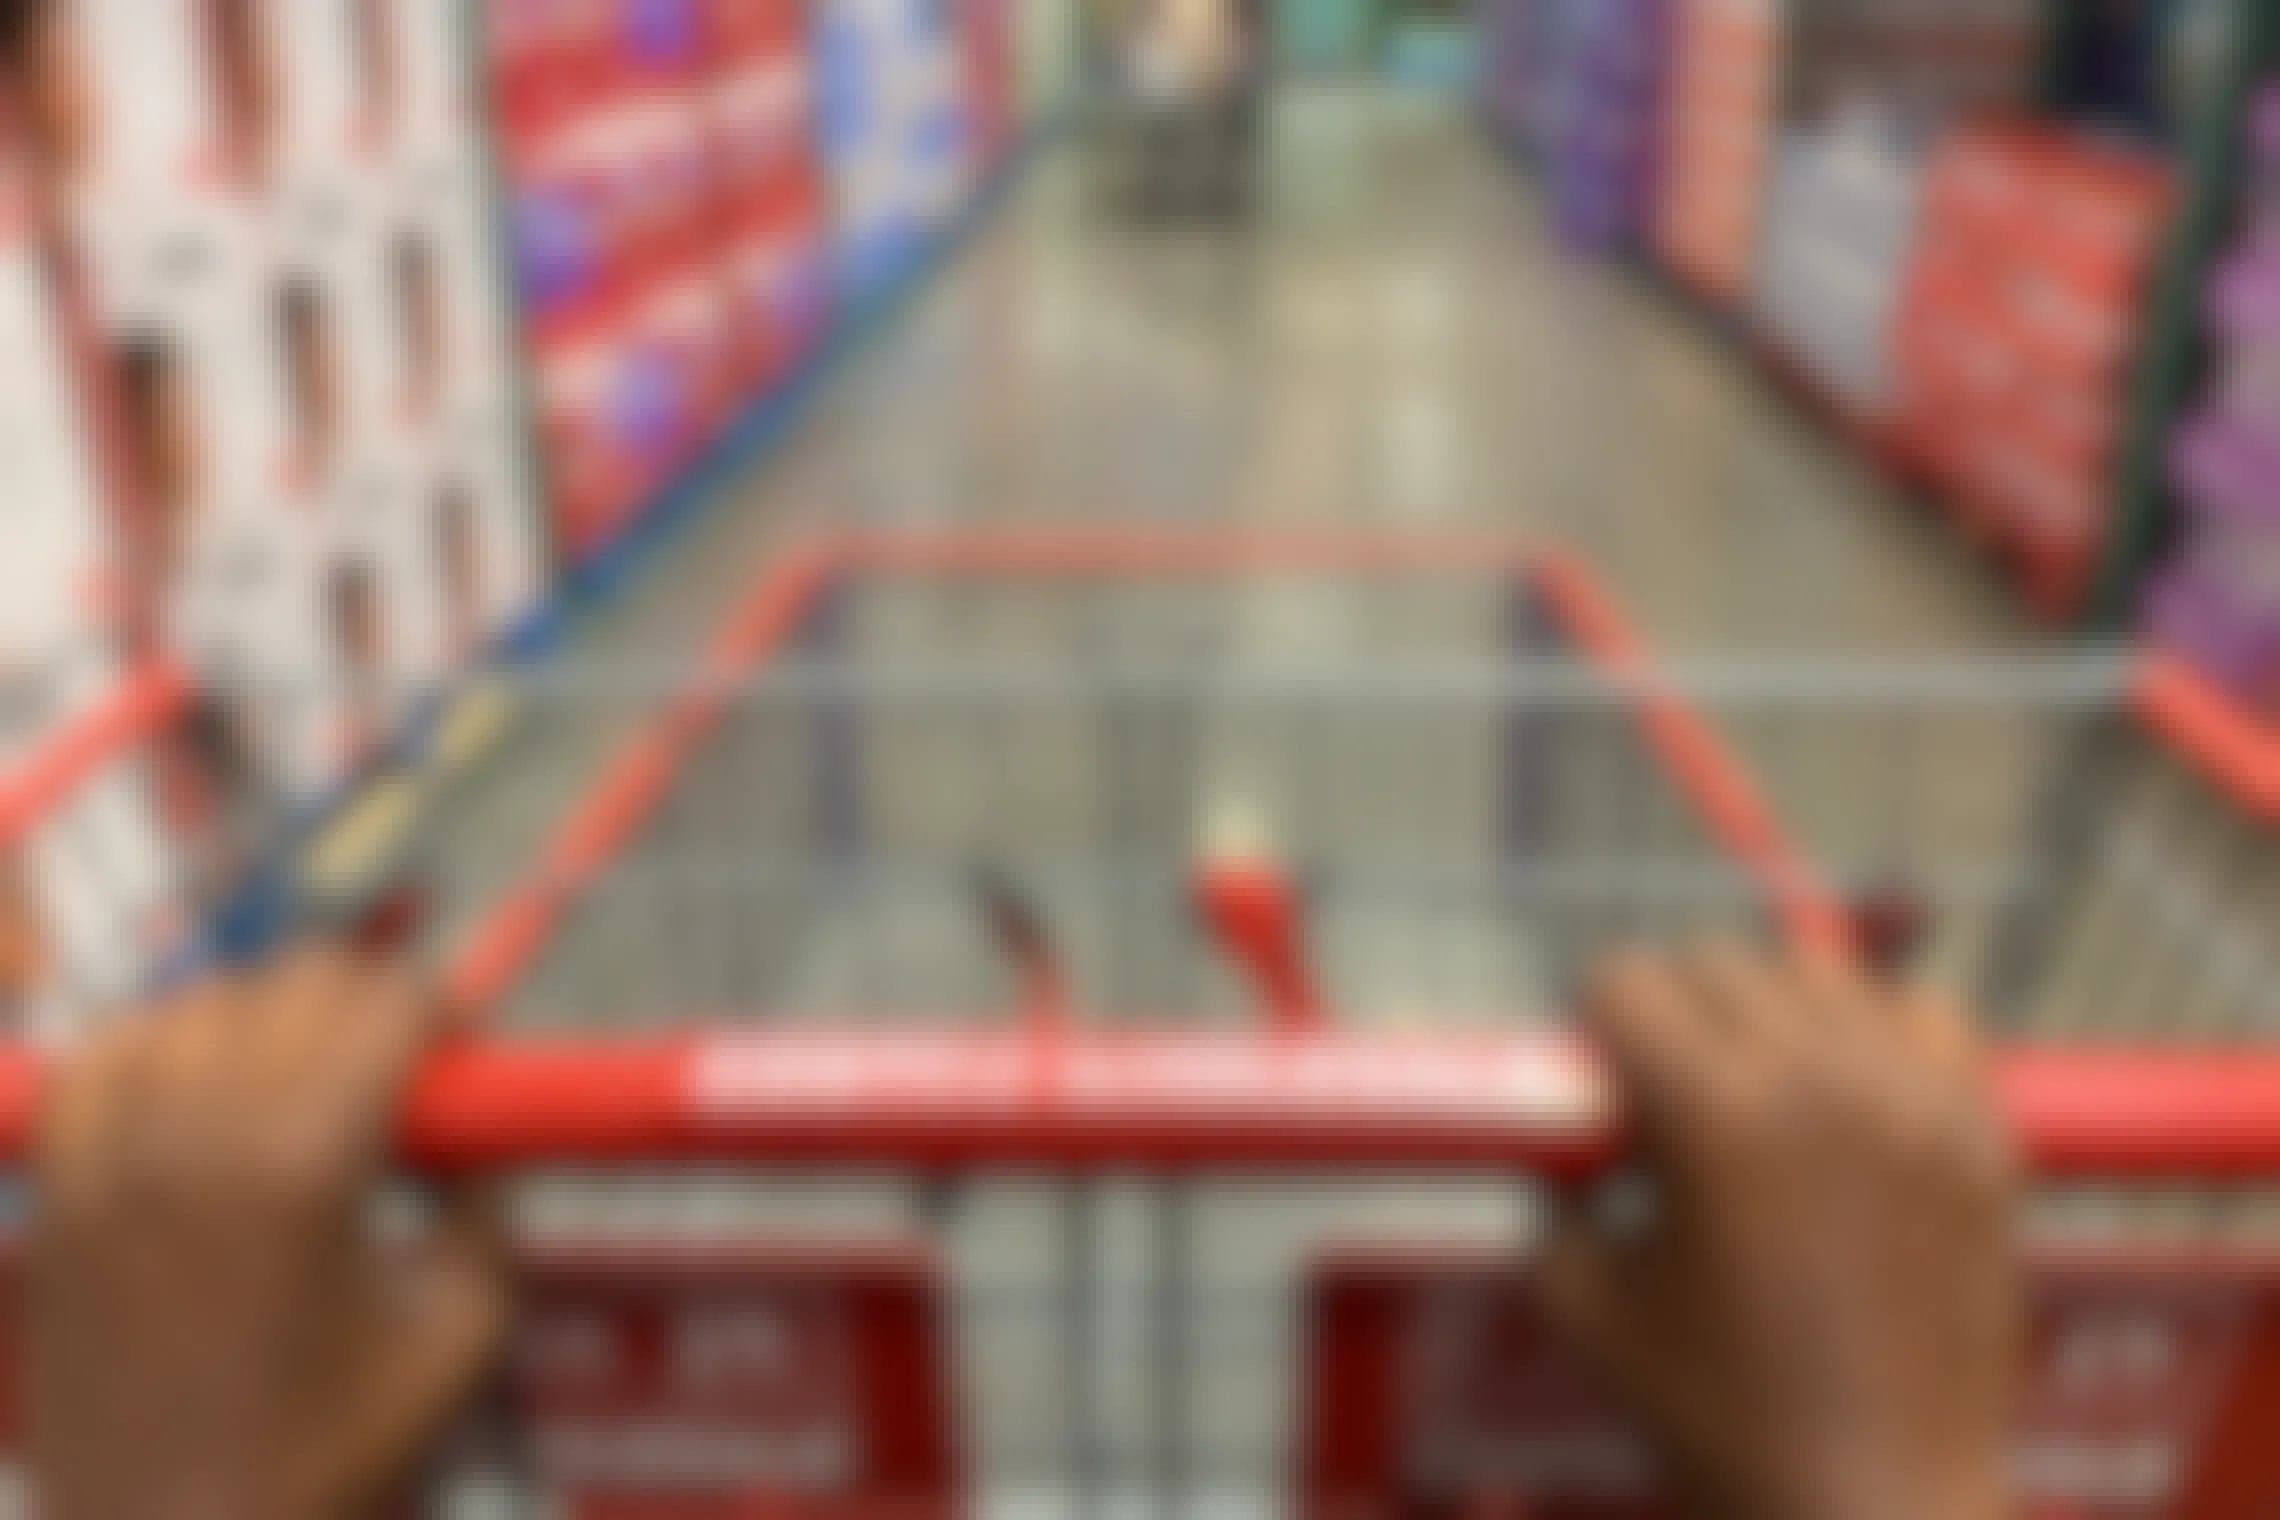 A Costco shopping cart being pushed down an aisle